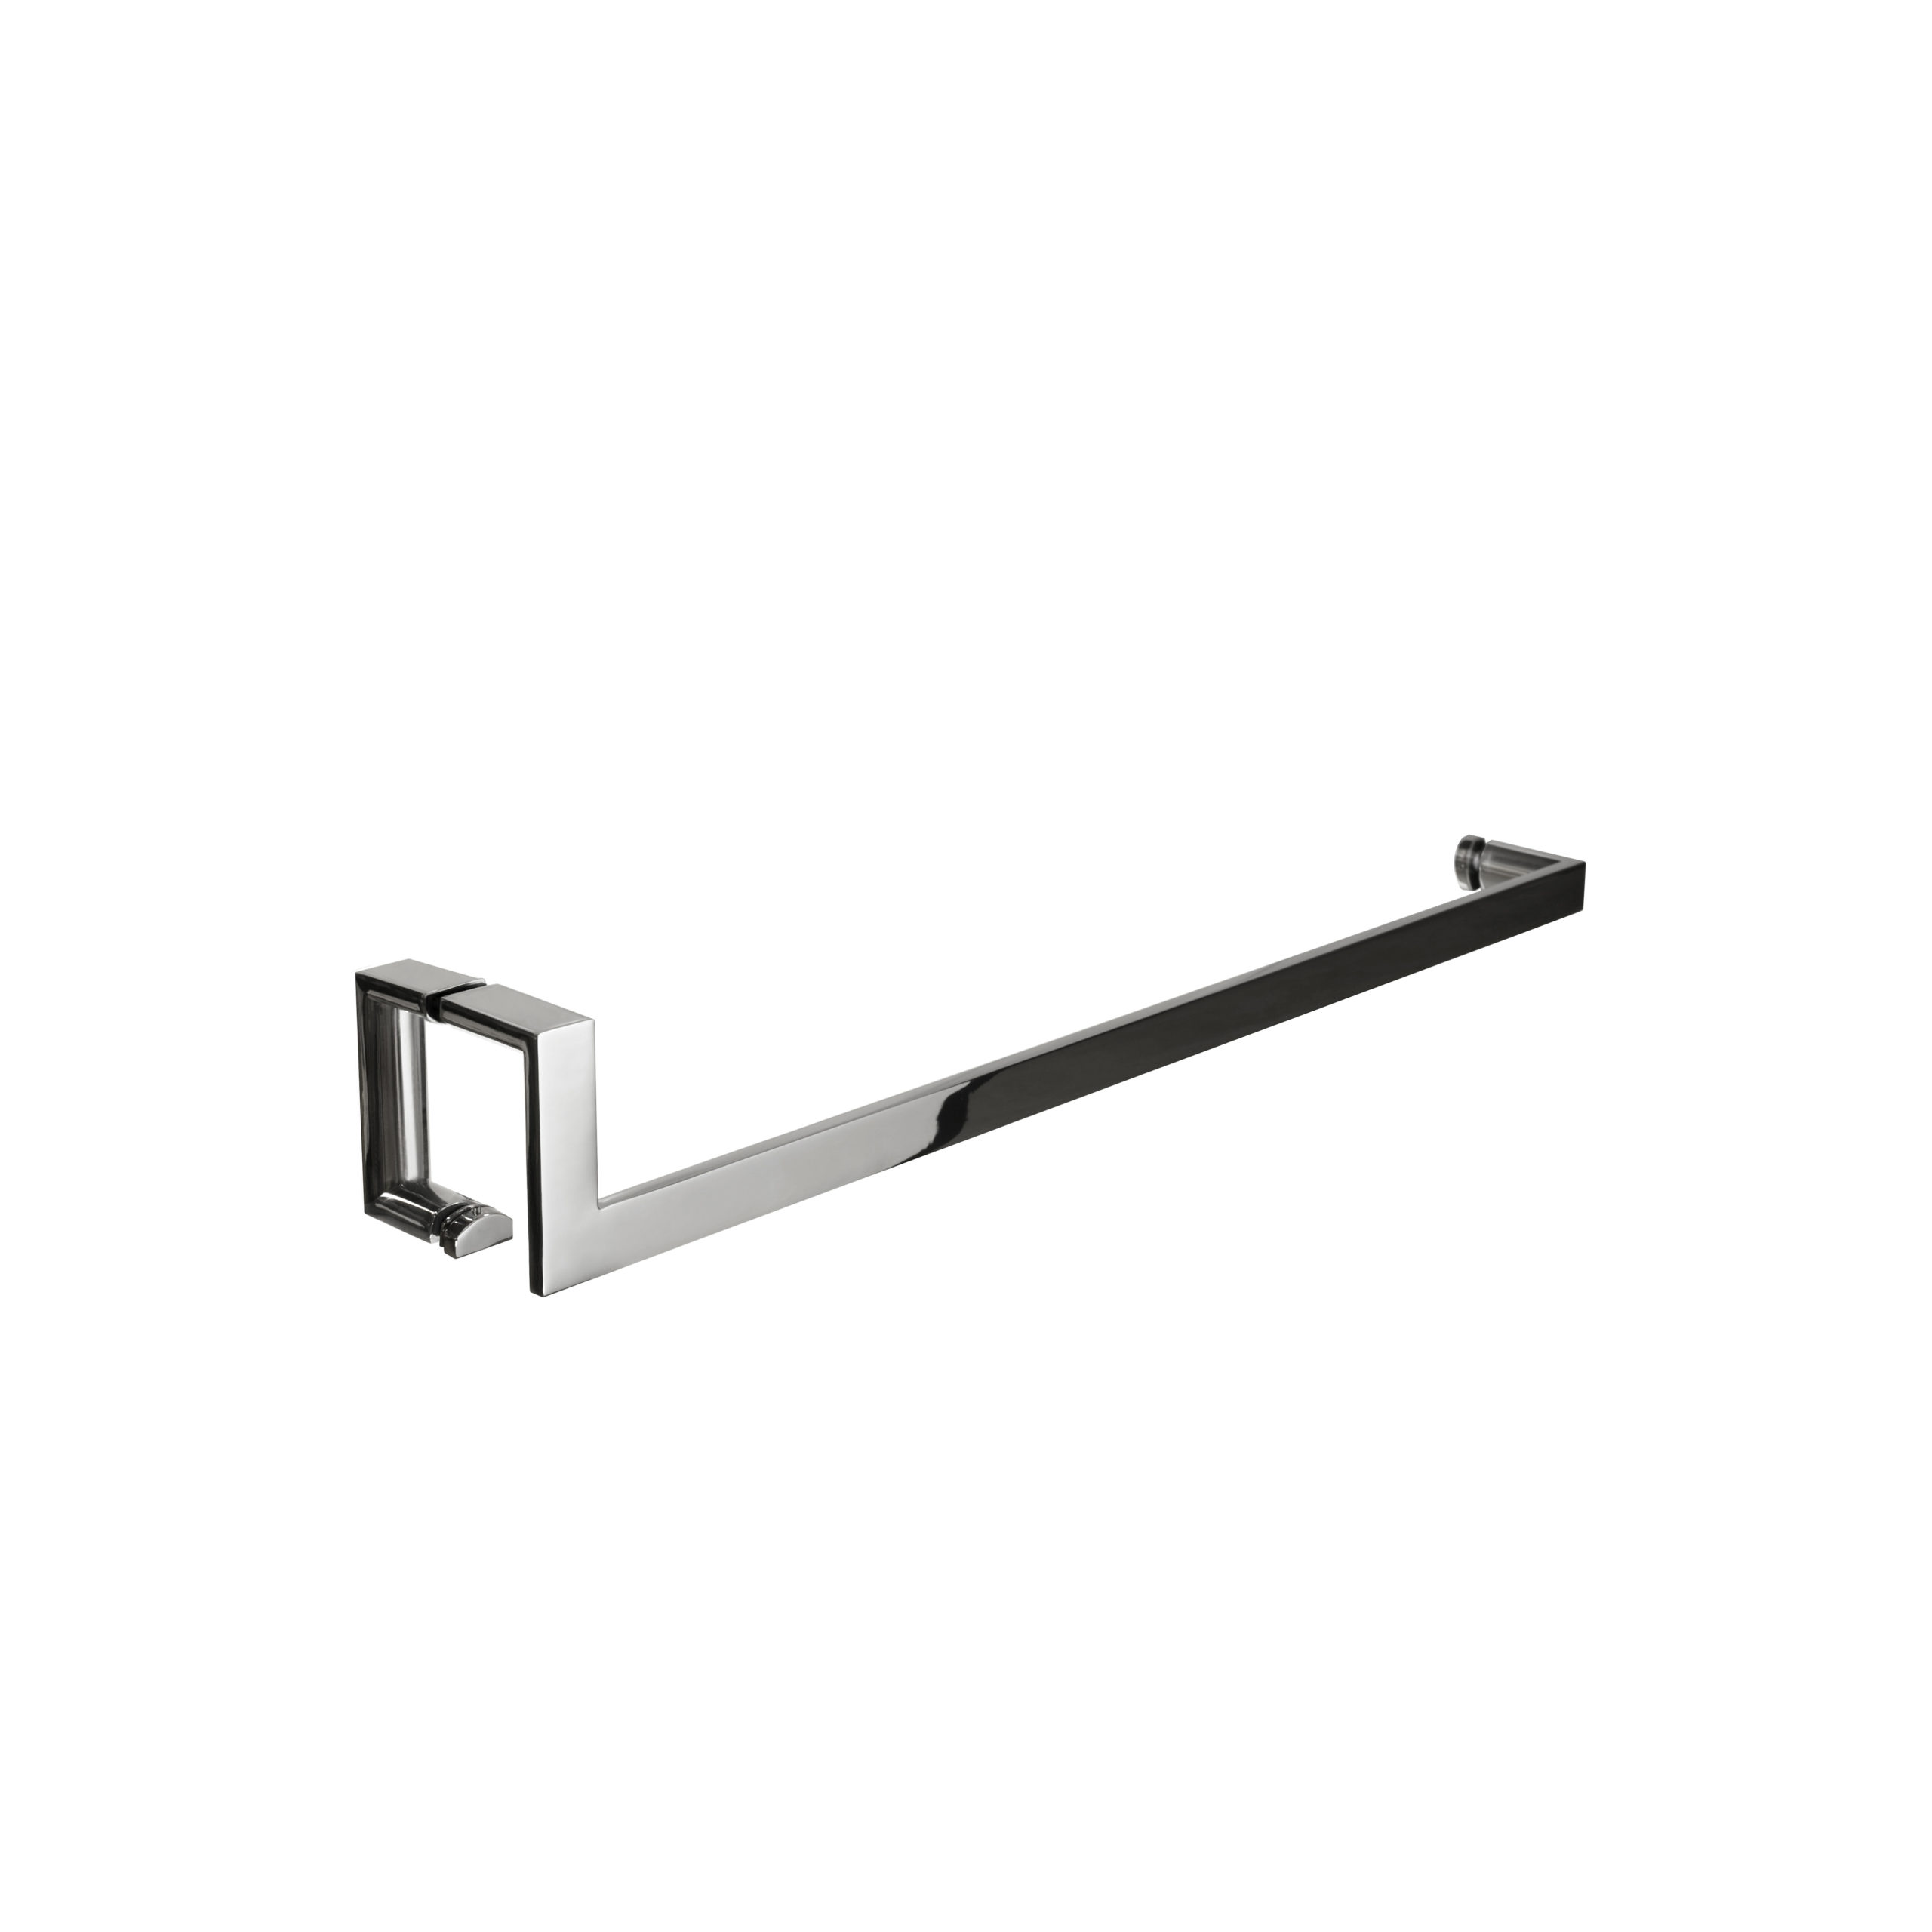 Polished stainless steel modern door handle and d pull - towel bar - product featured image - 24 inch length - product SKU JU 402-4 PSS